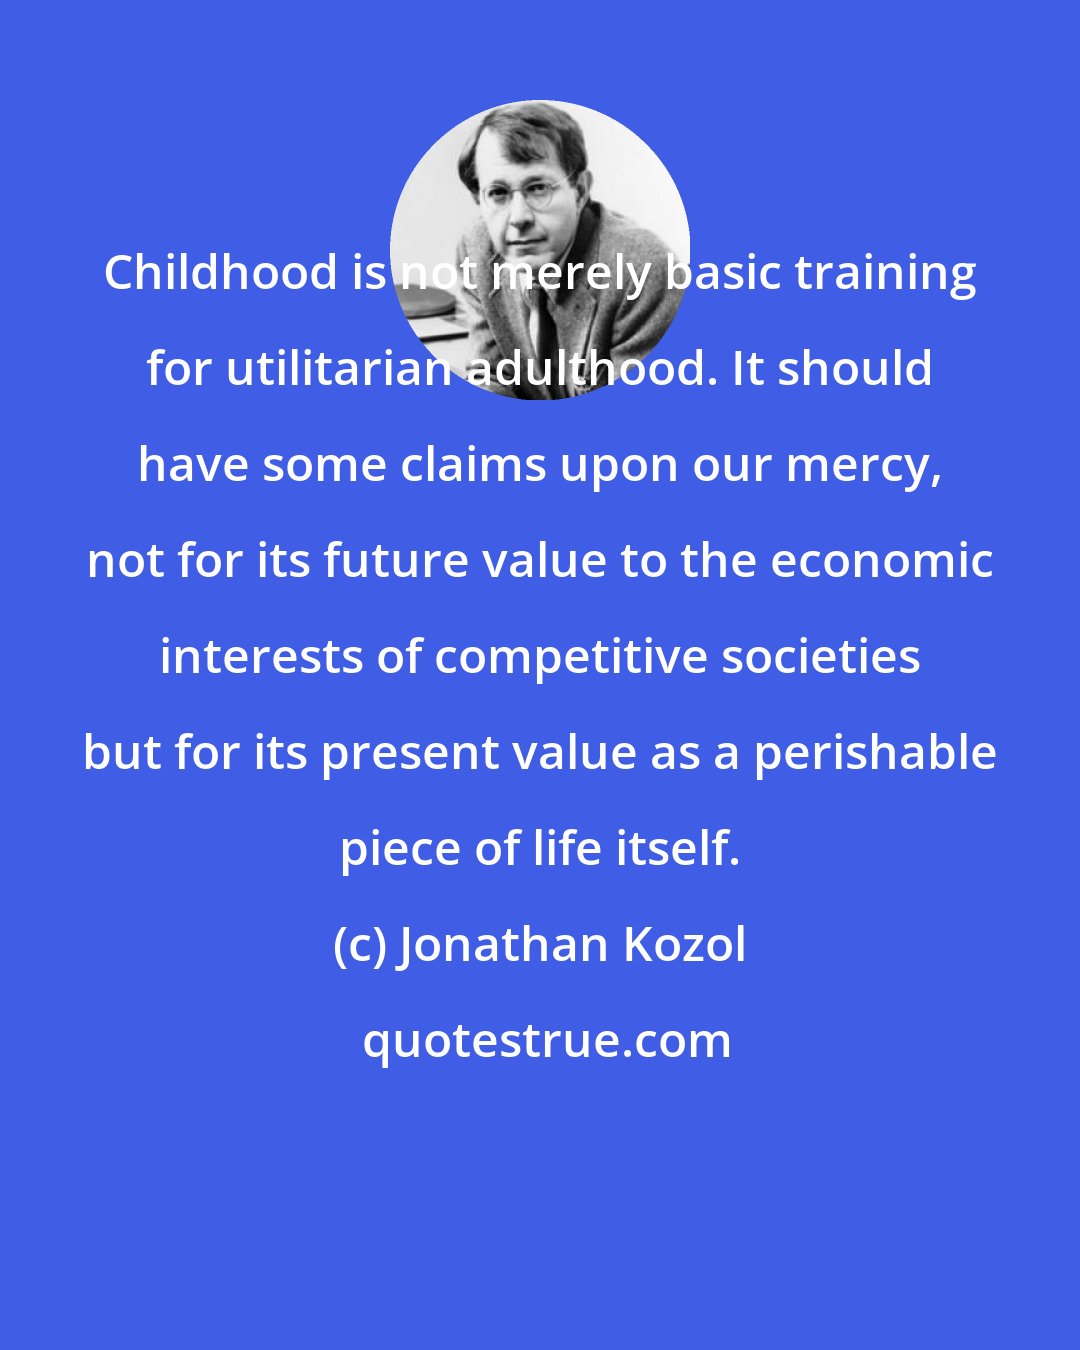 Jonathan Kozol: Childhood is not merely basic training for utilitarian adulthood. It should have some claims upon our mercy, not for its future value to the economic interests of competitive societies but for its present value as a perishable piece of life itself.